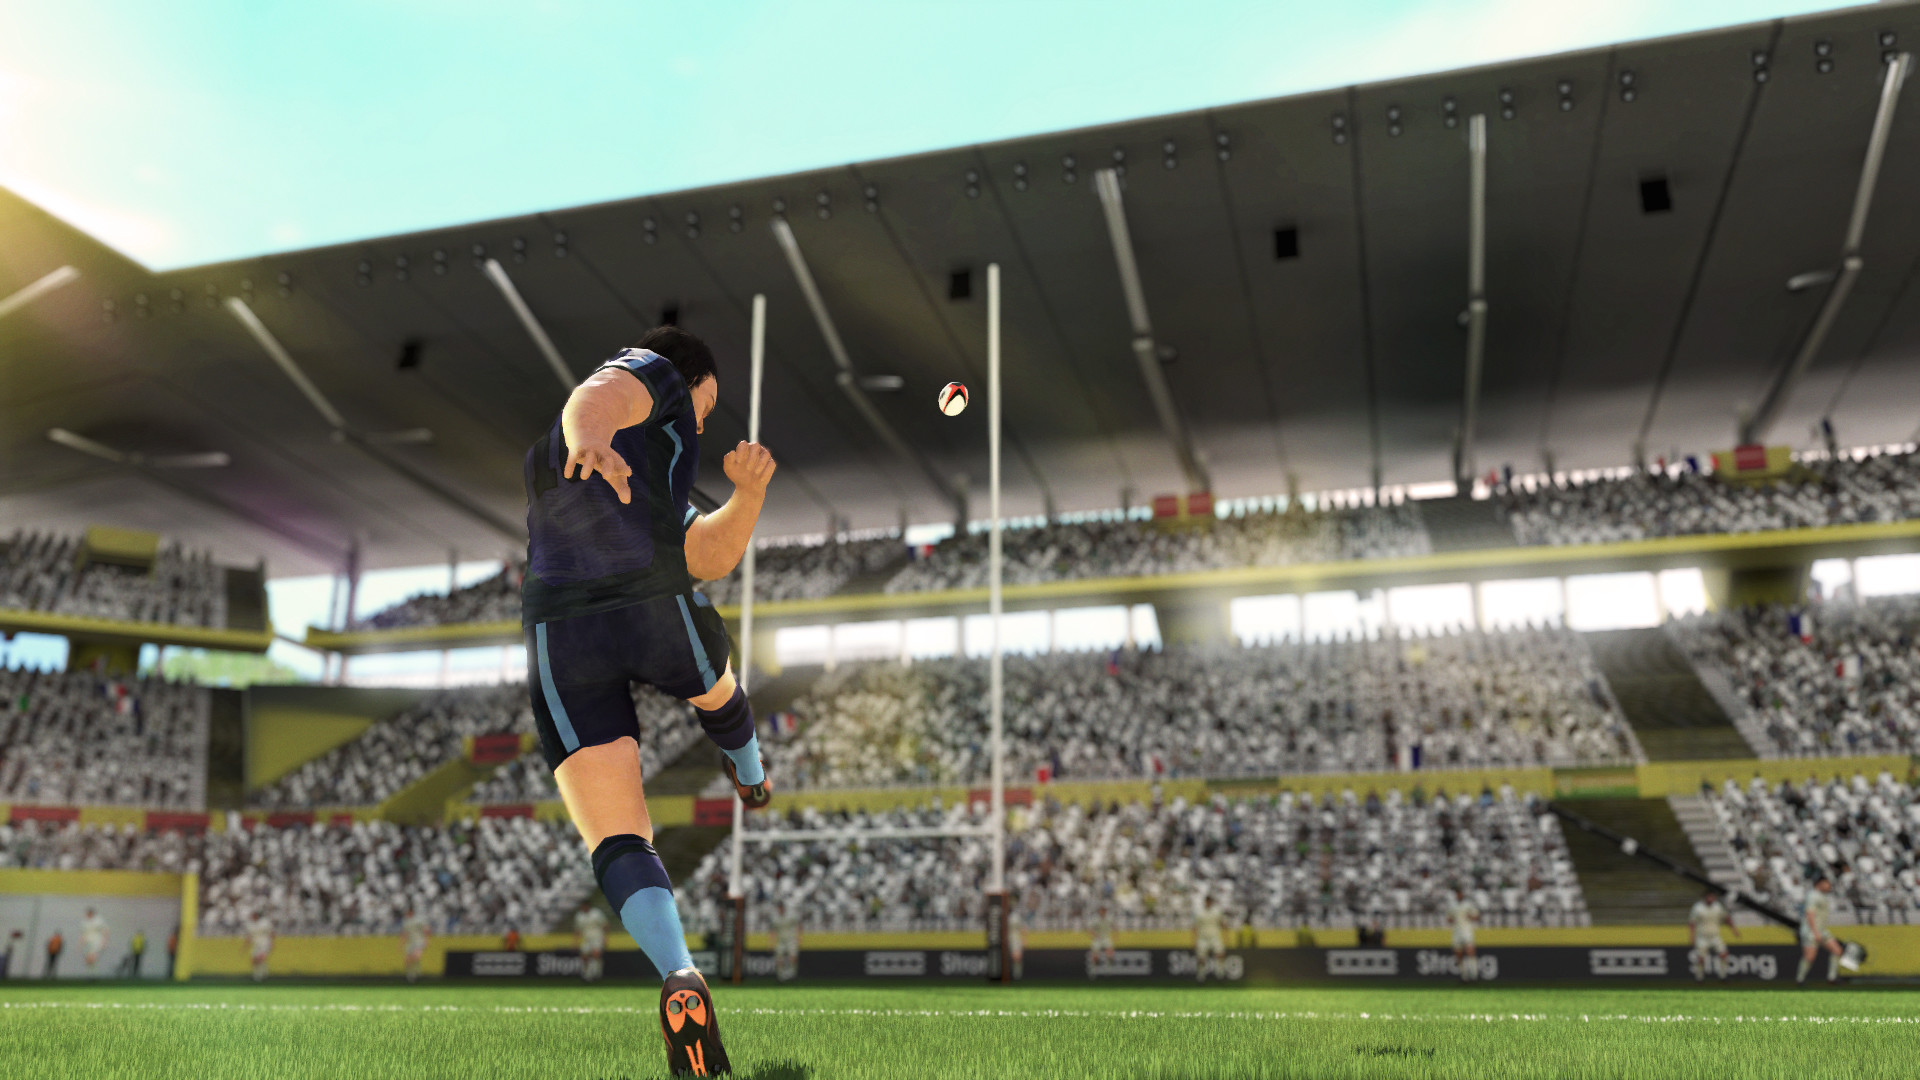 Rugby 22 Free Download